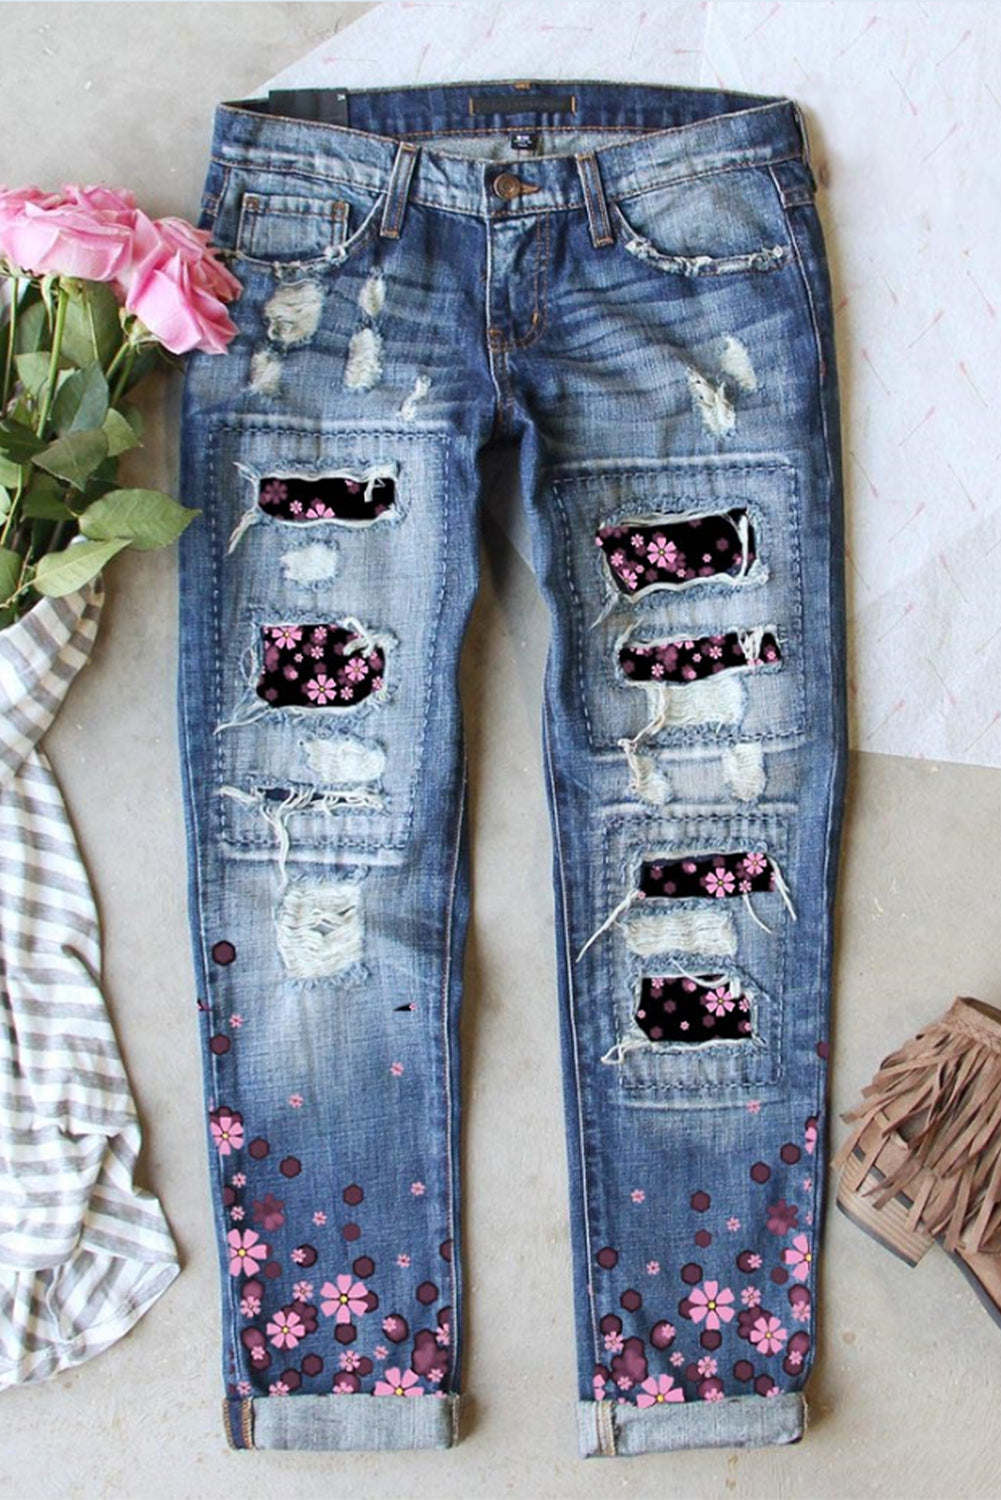 Floral Patchwork Ripped Denim Jeans $ 43.99 - Evaless